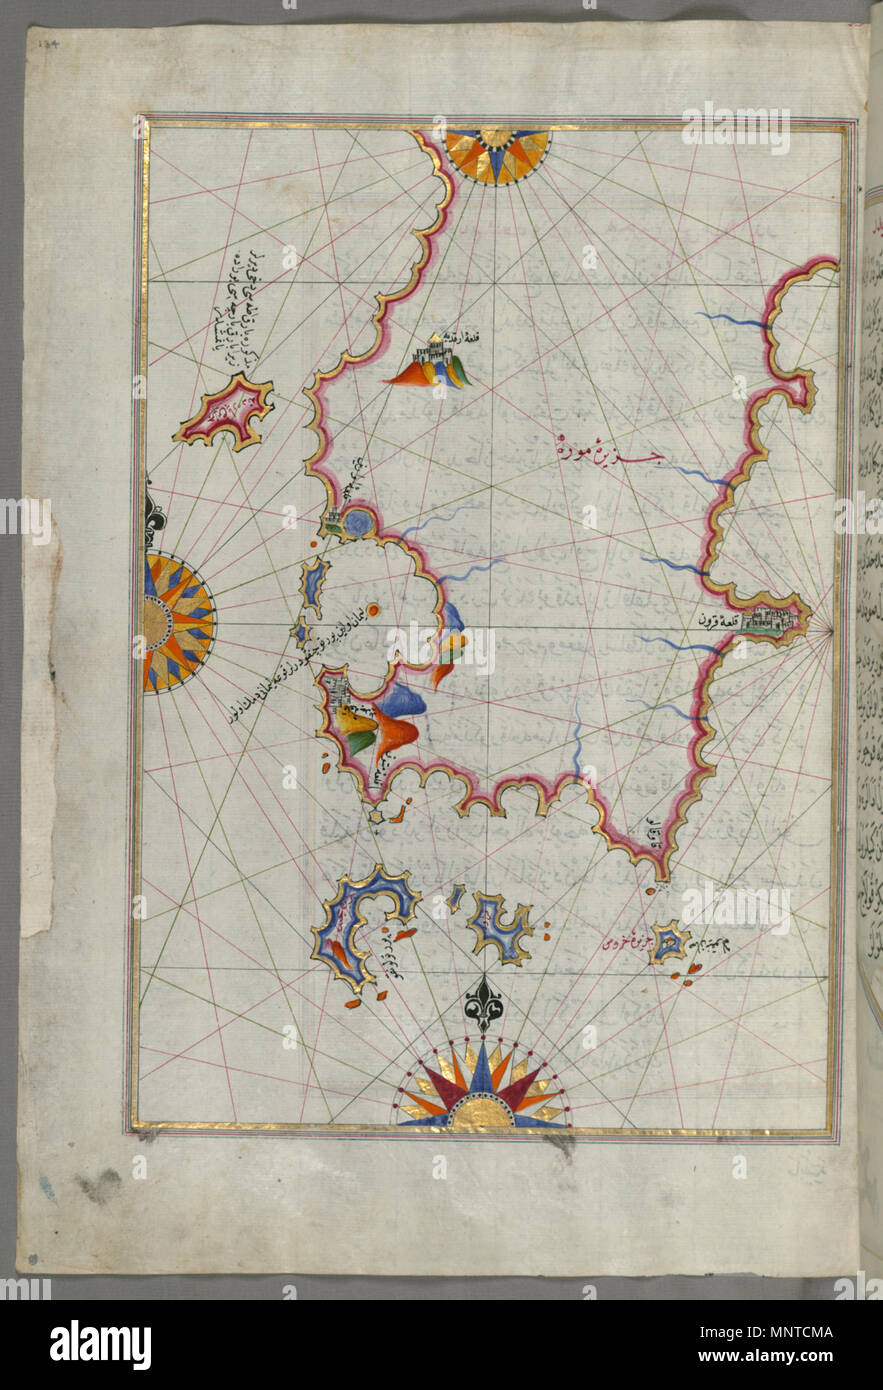 Piri Reis (Turkish, 1465-1555). 'Leaf from Book on Navigation,' 17th-18th century. ink, paint, and gold on paper. Walters Art Museum (W.658.134A): Acquired by Henry Walters. W.658.134a 1004 Piri Reis - Map of the Eastern Part of the Peloponnese Peninsula - Walters W658134A - Full Page Stock Photo